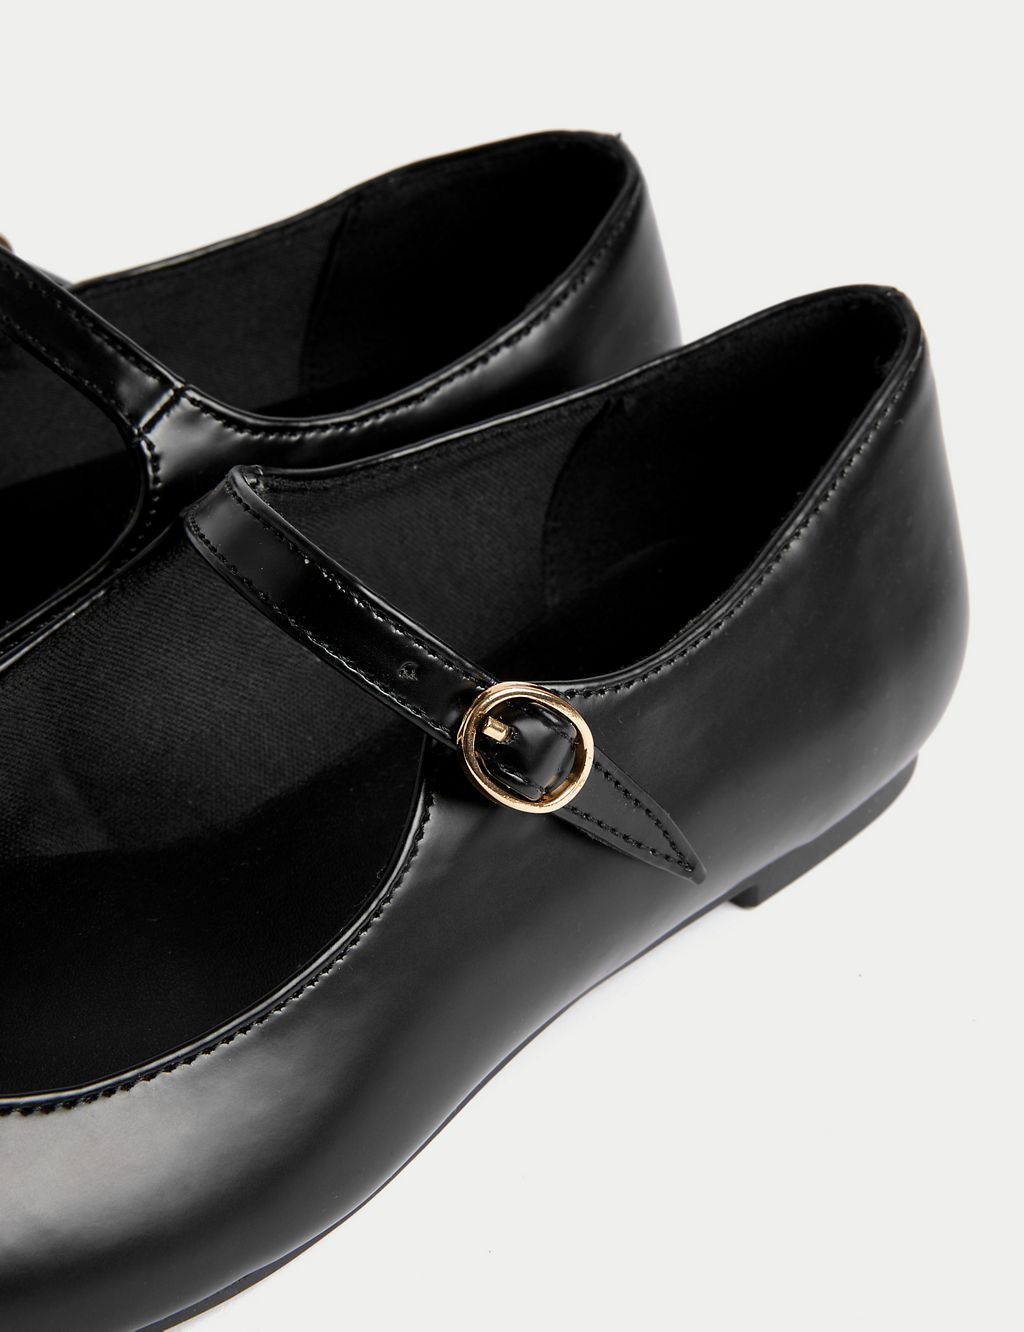 Buckle Flat Square Toe Ballet Pumps 2 of 3